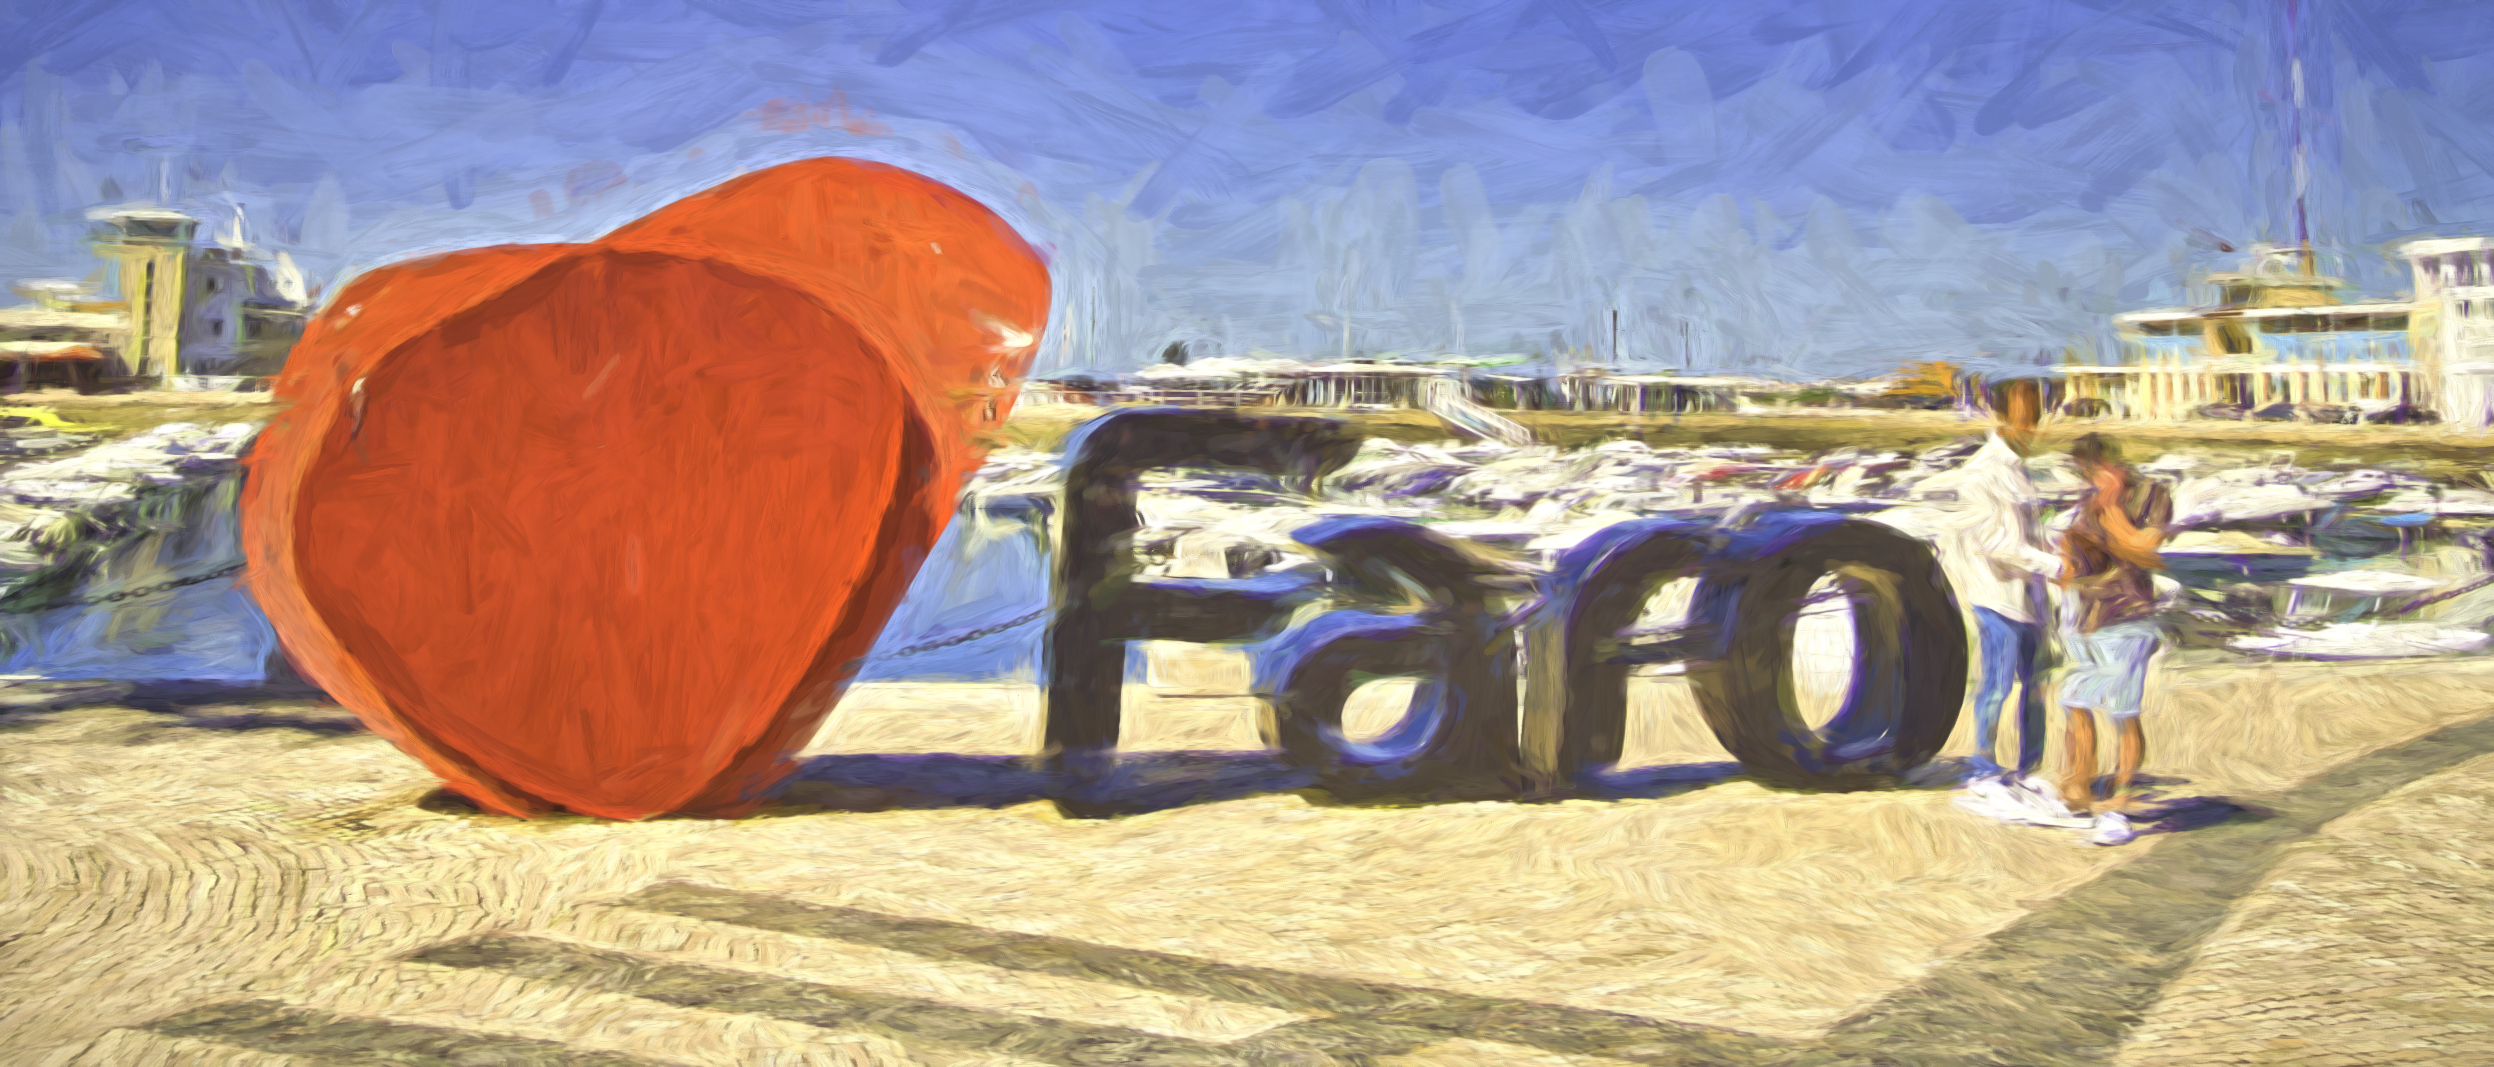 Red Heart shape next to the word Faro in Portugal